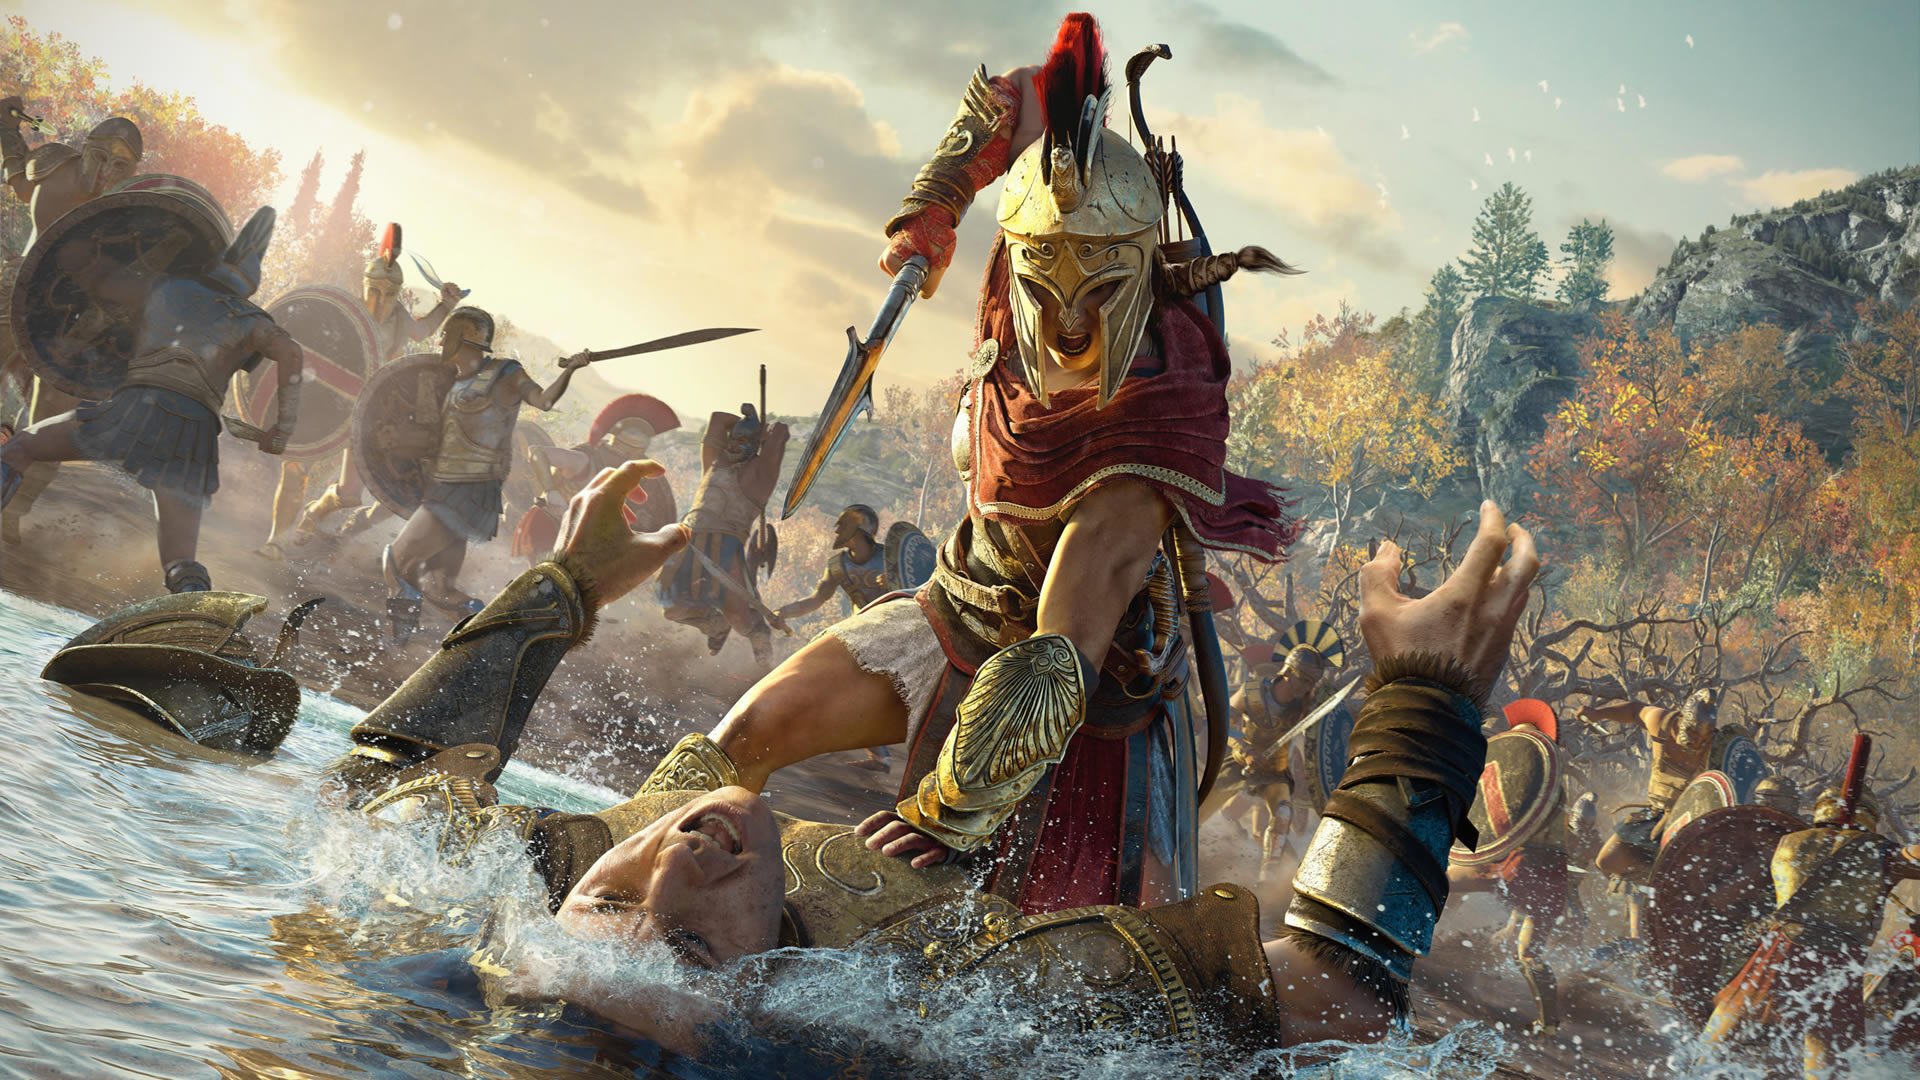 Assassin's Creed Odyssey 1.12 update